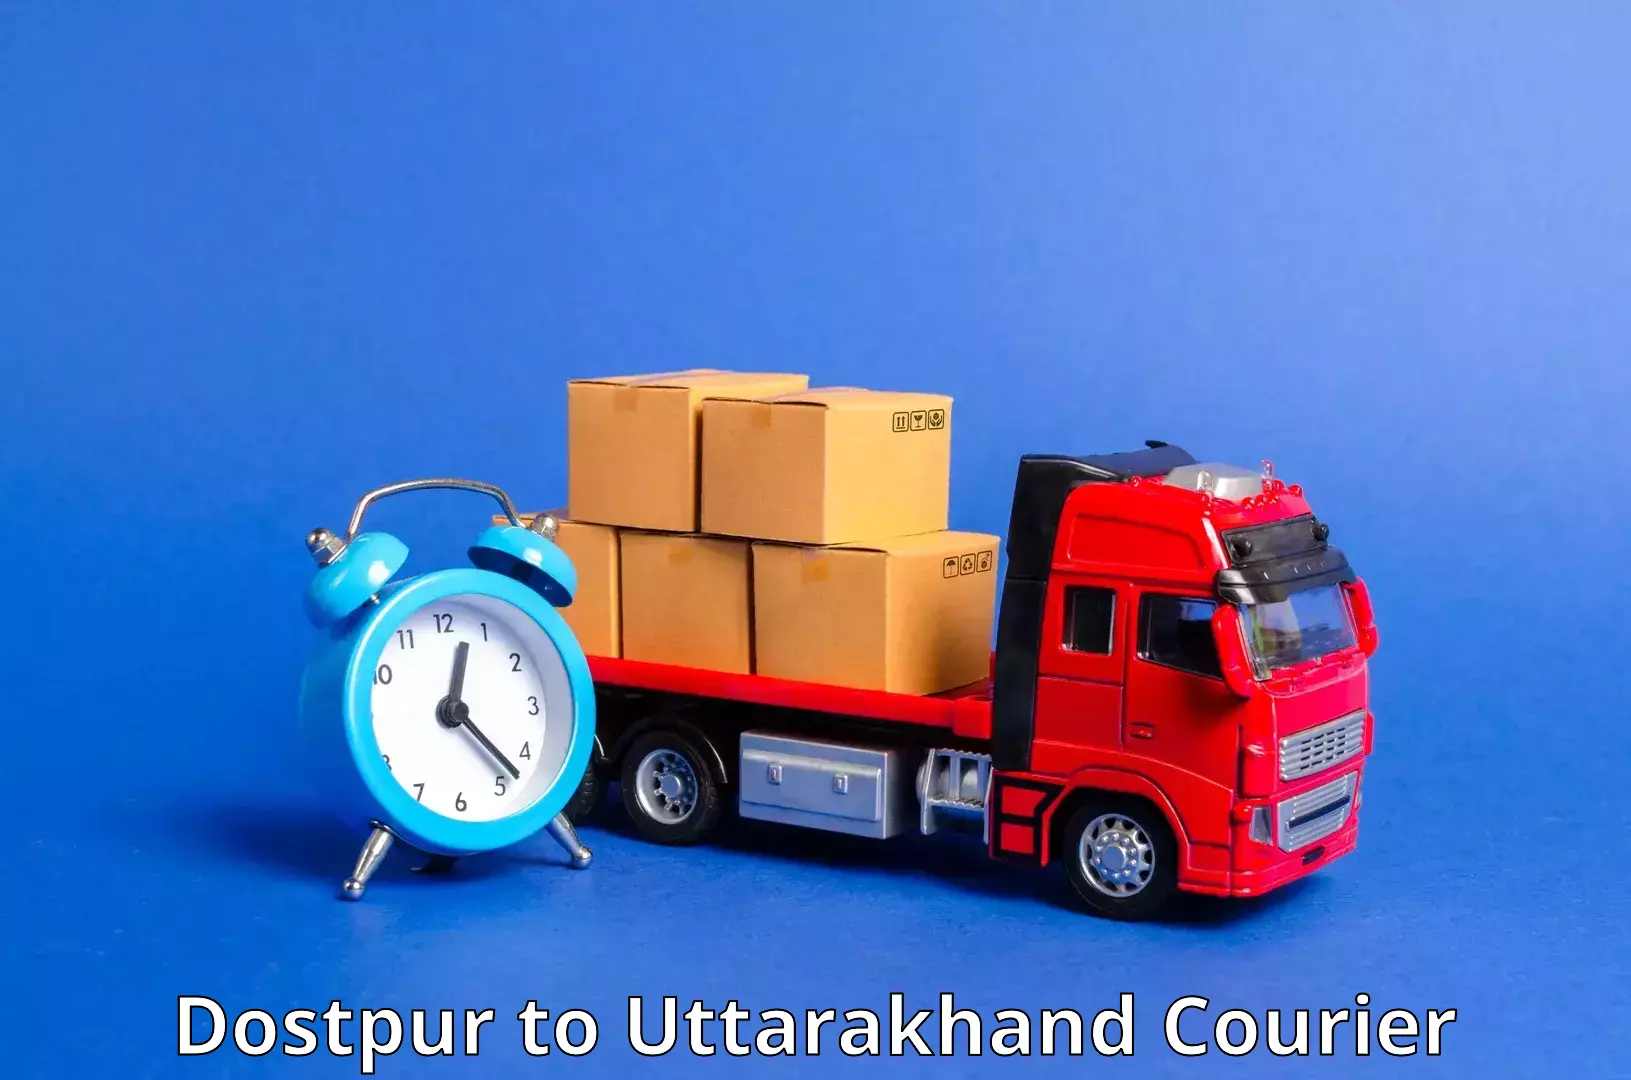 Express delivery capabilities Dostpur to Paithani